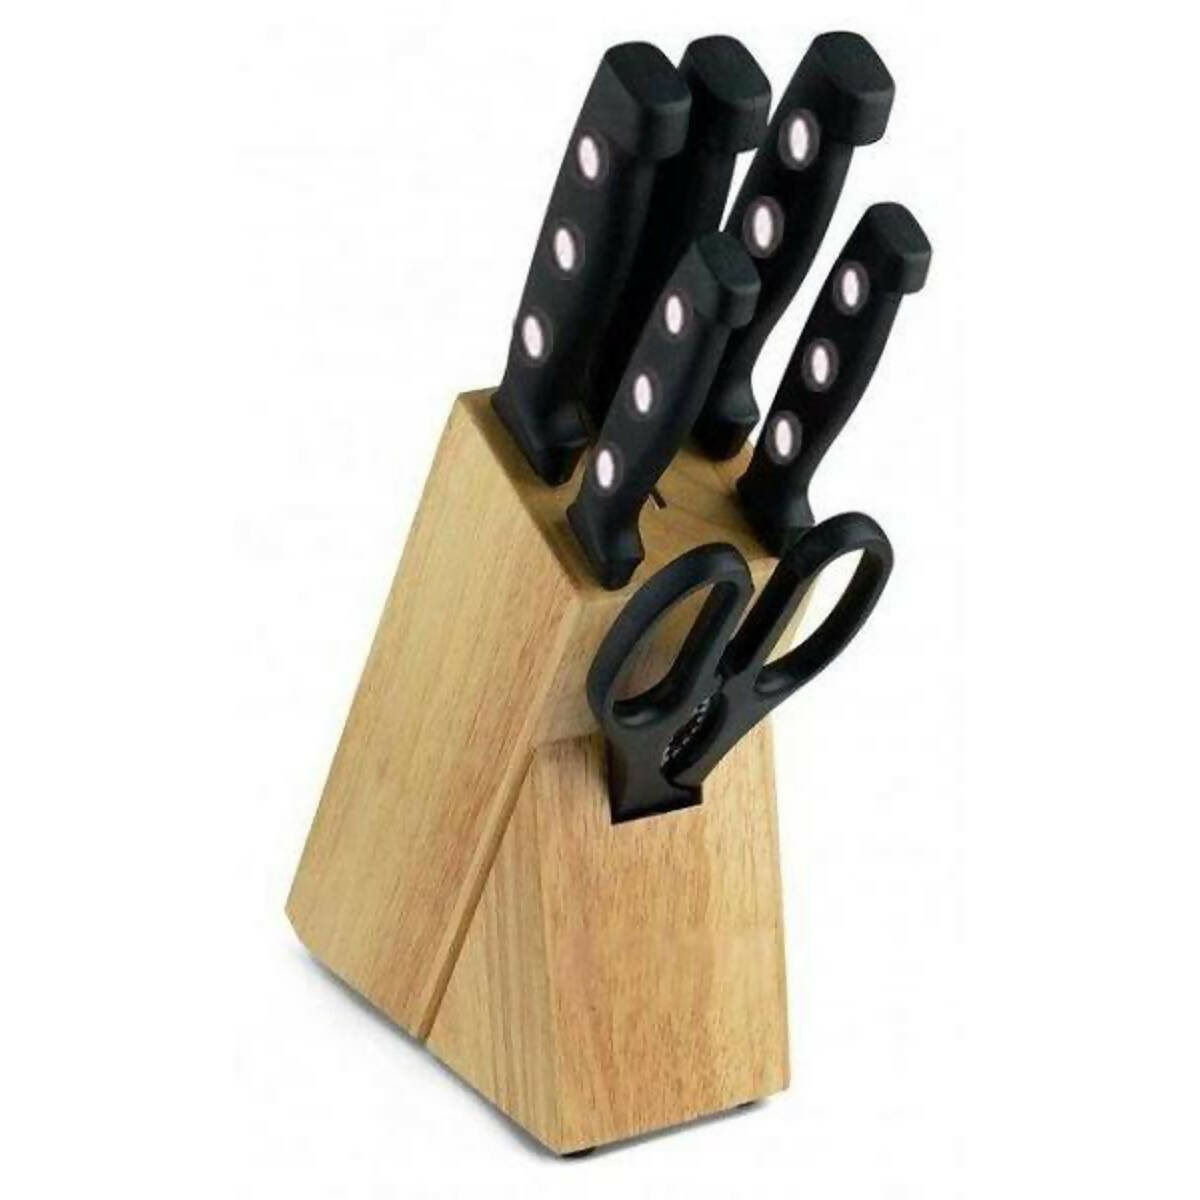 7 PIECES KNIVES SET WITH ONE WOODEN STAND